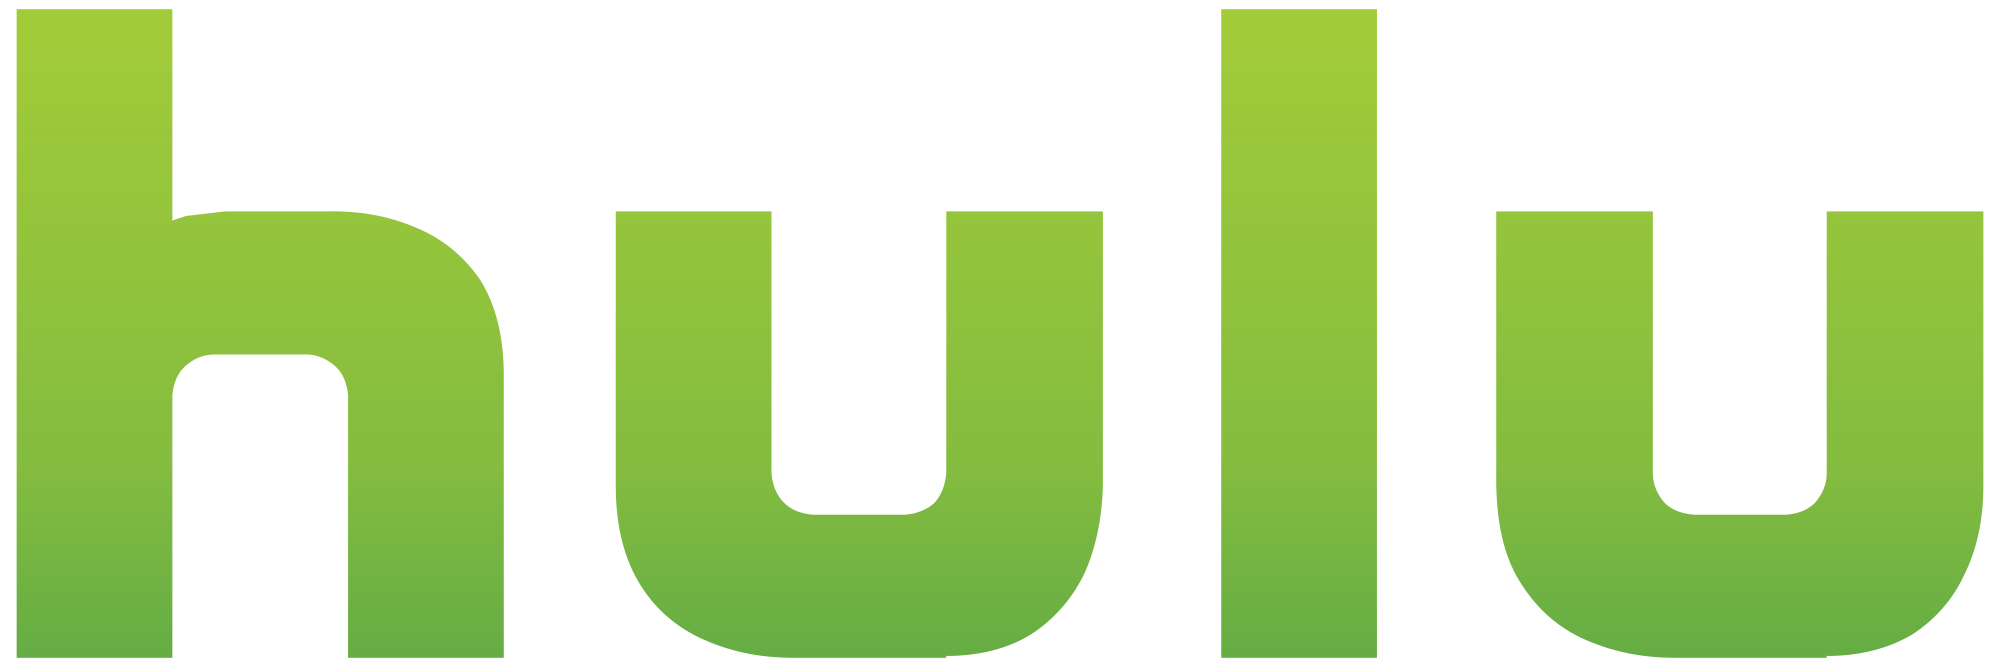 Hulu is a PLANNET building technology client